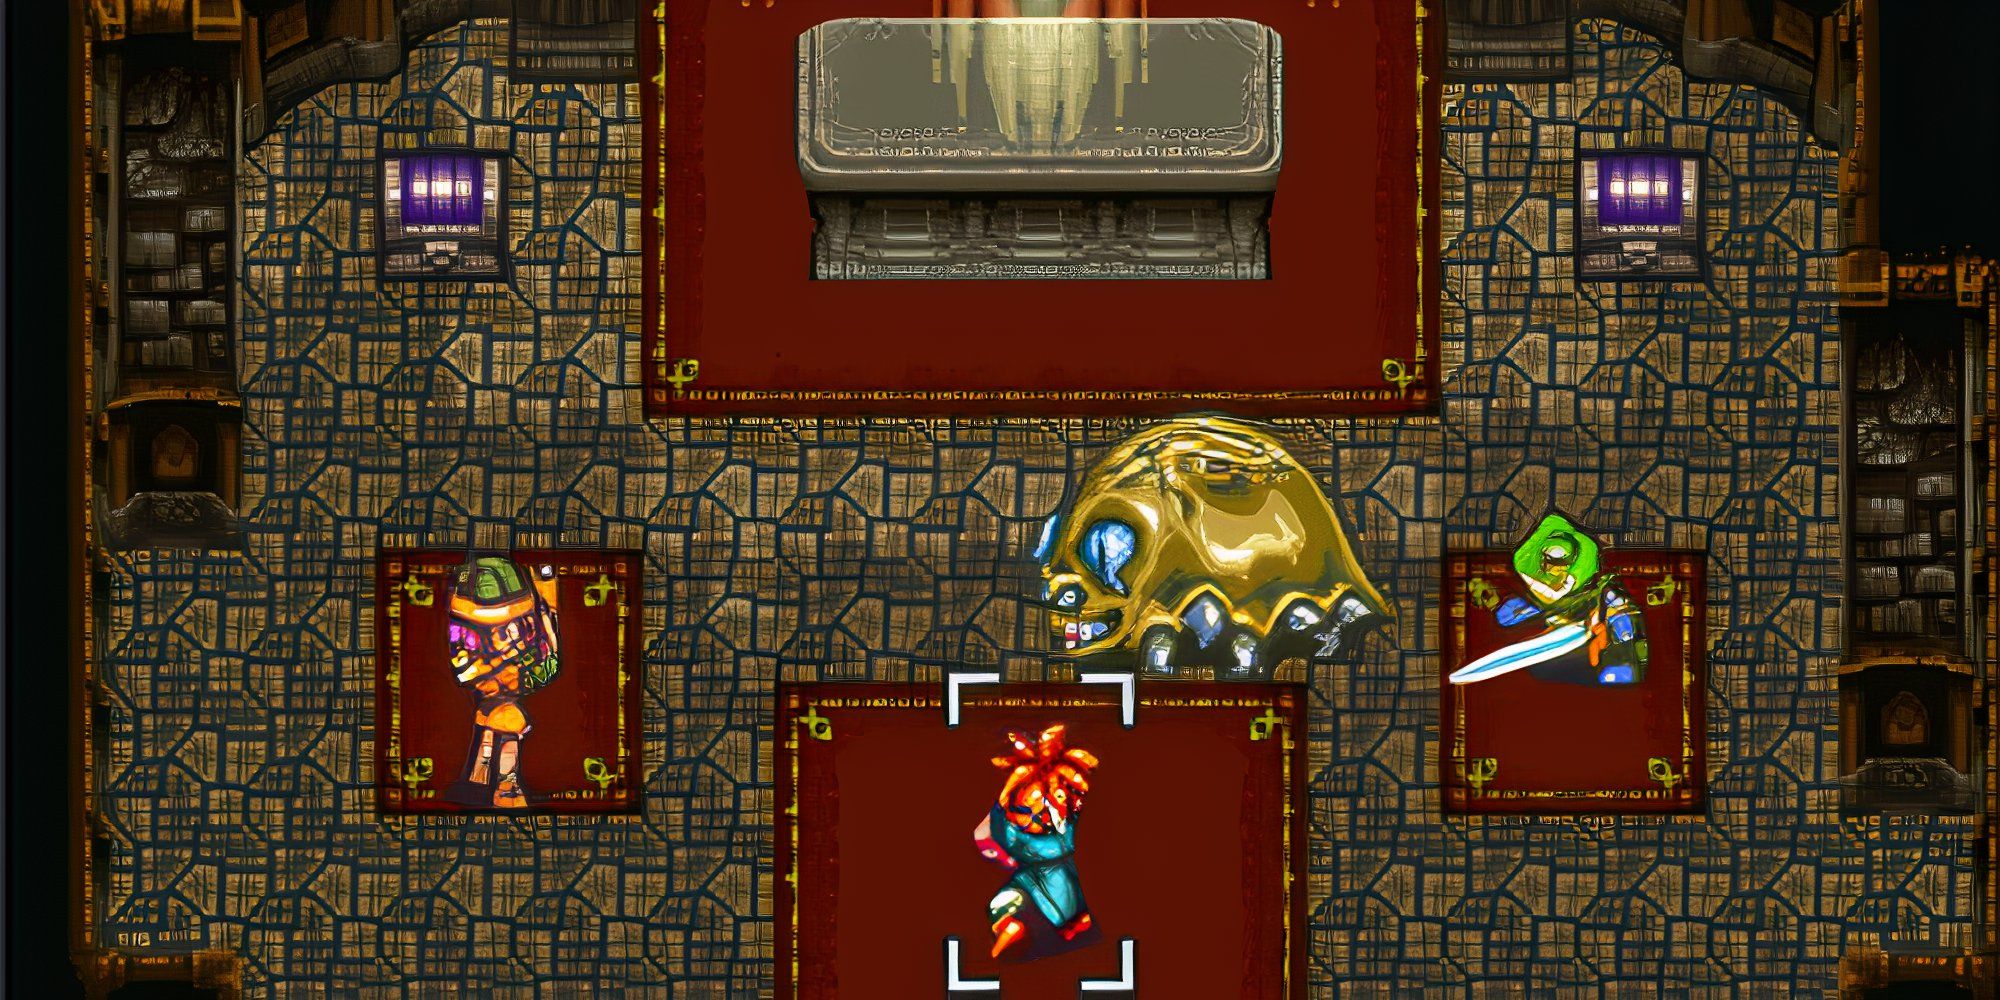 Fighting a boss in Chrono Trigger